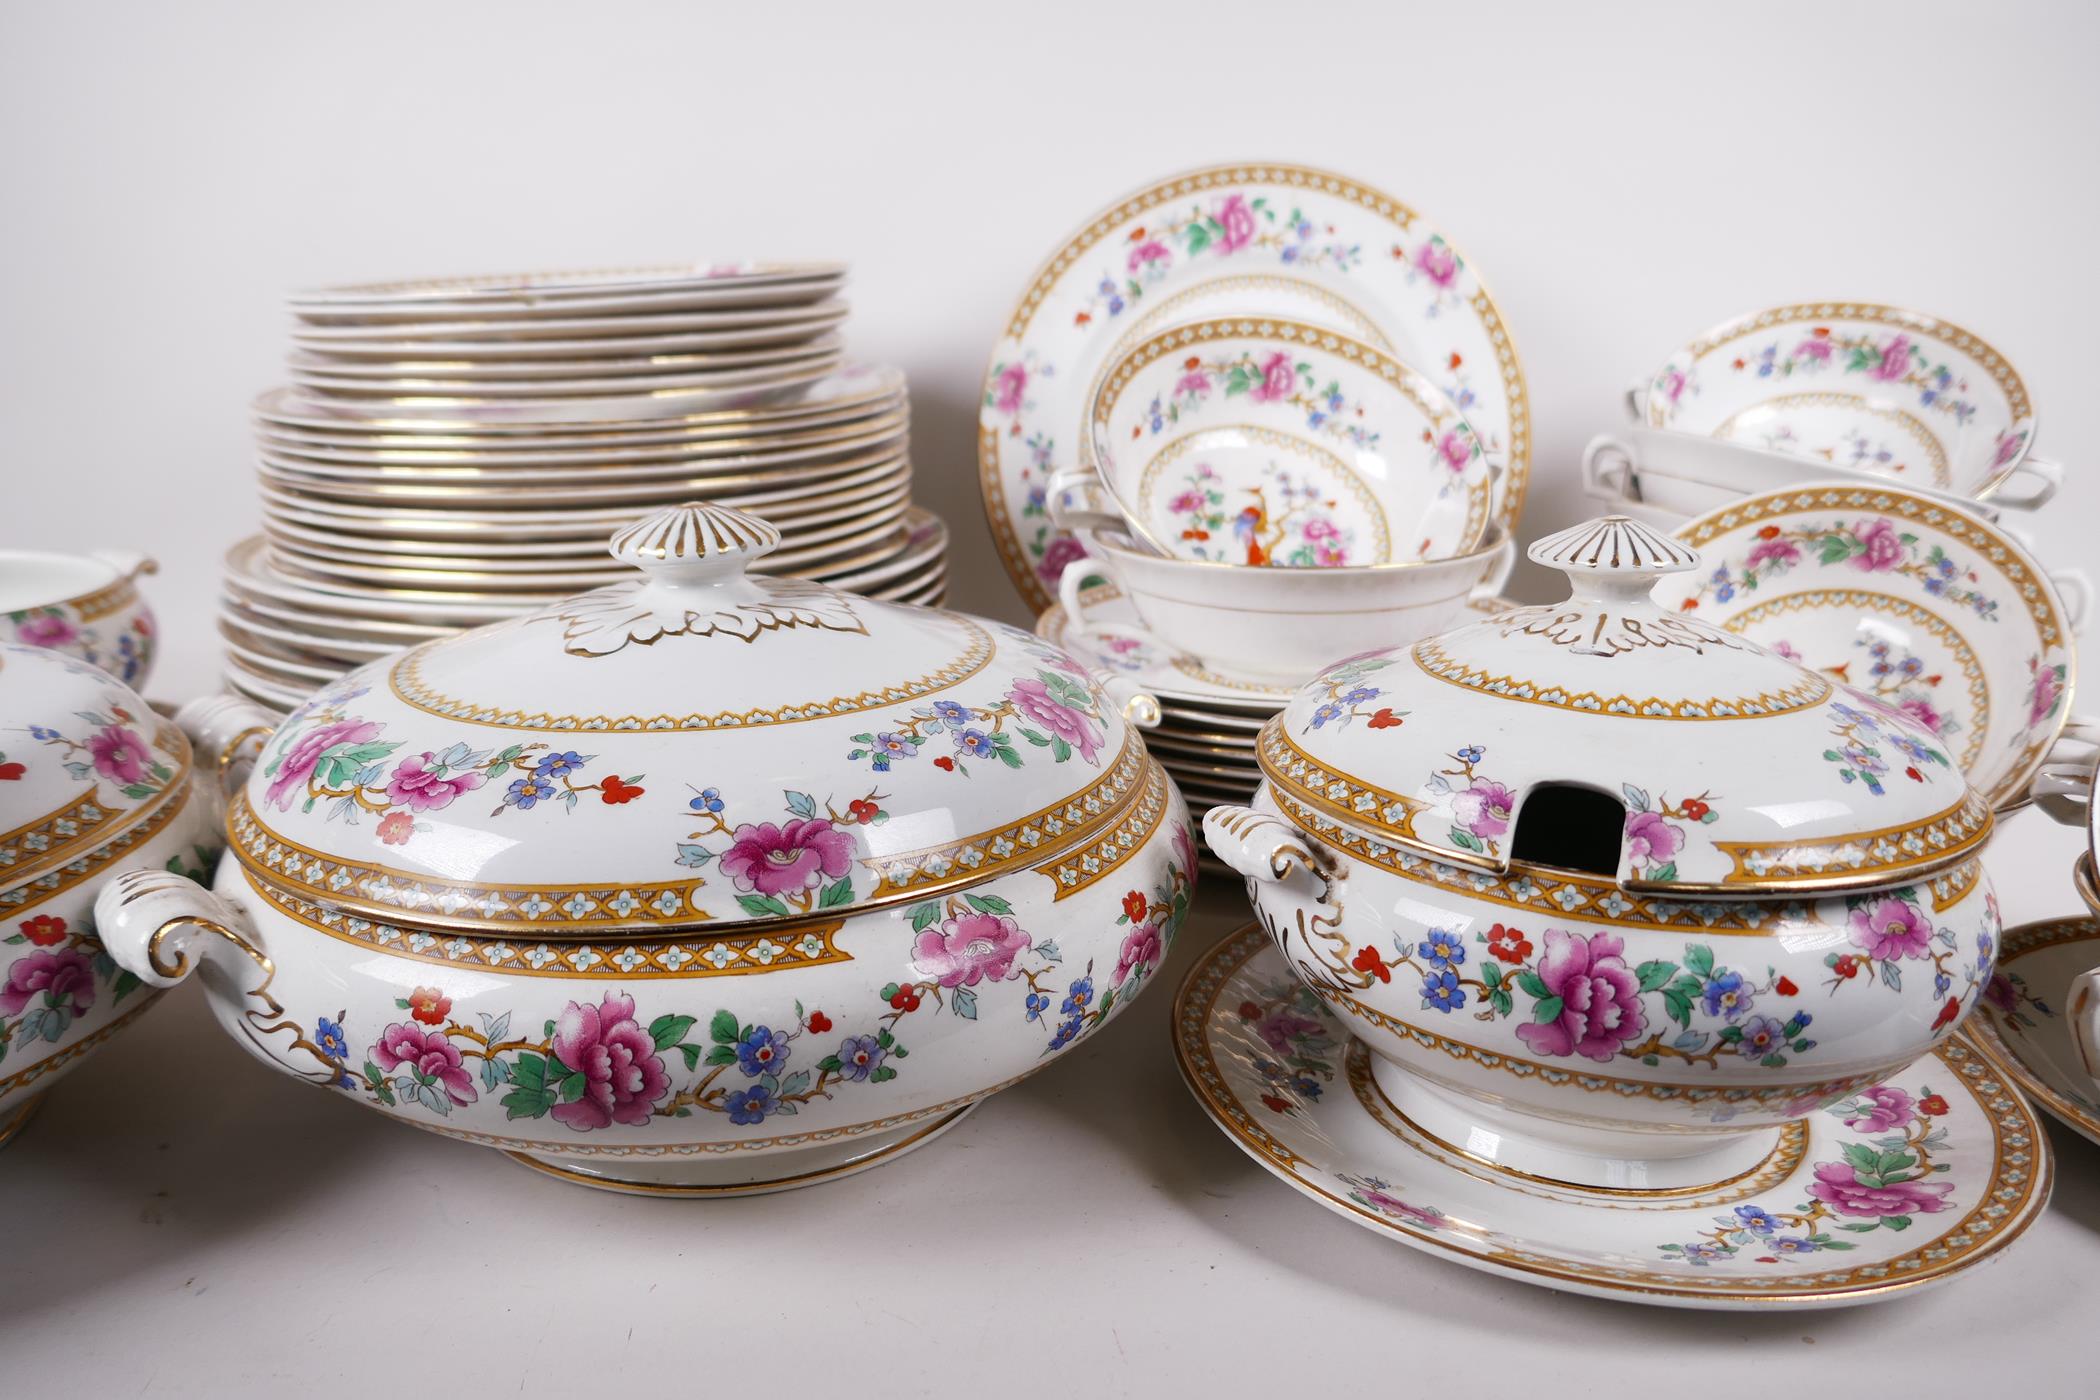 An Art Deco Bridgwood and Sons dinner service in the 'Paradise' pattern, produced for Waring & - Image 2 of 8